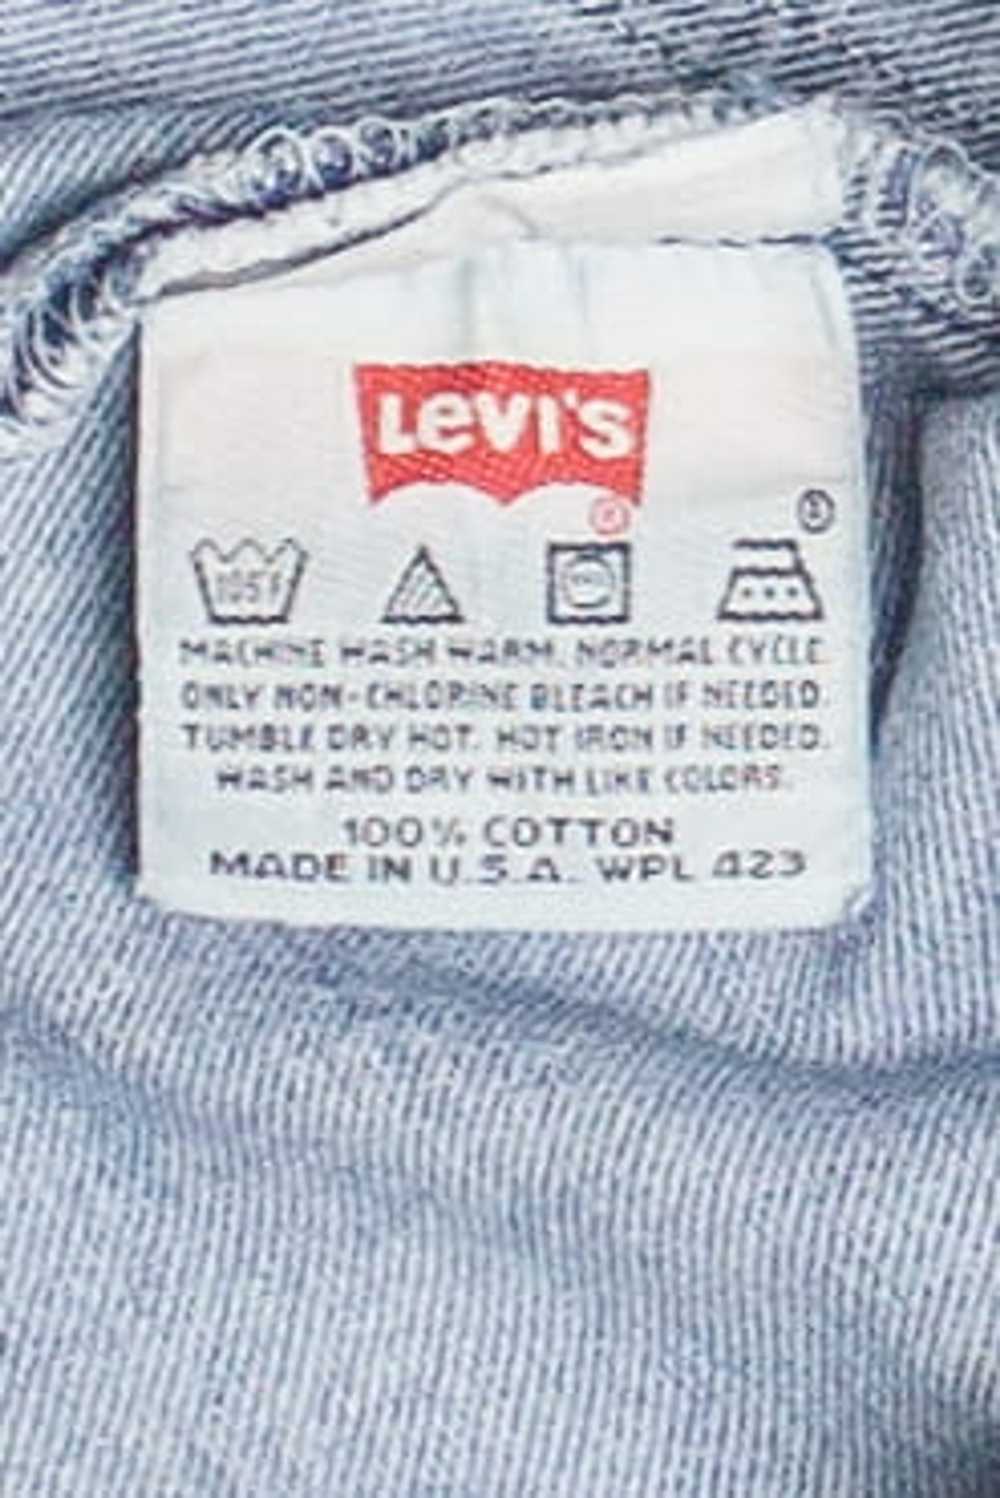 Vintage Levi's 501 High Waisted Cut Off Shorts 14… - image 5